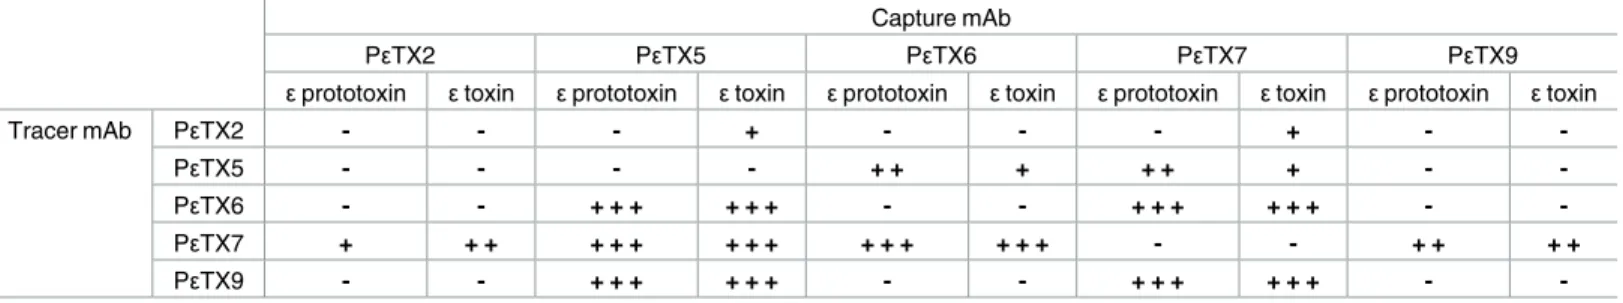 Table 1. Colorimetric signals obtained for all combinations of mAbs used as capture and tracer antibodies in a sandwich enzyme immunoassay format.